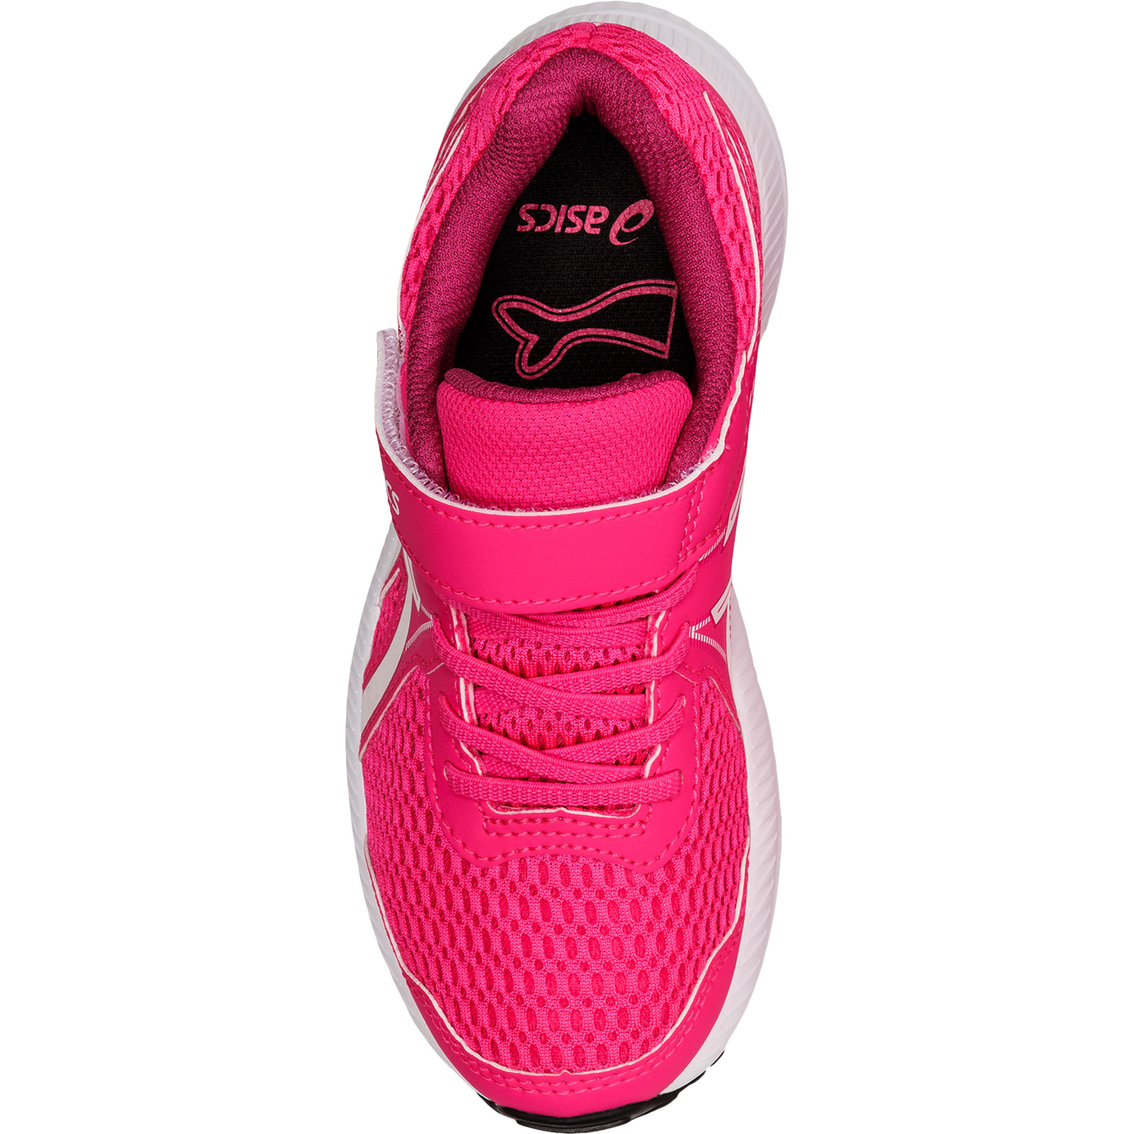 ASICS Preschool Girls Gel Contend 7 Athletic Shoes - Image 4 of 6